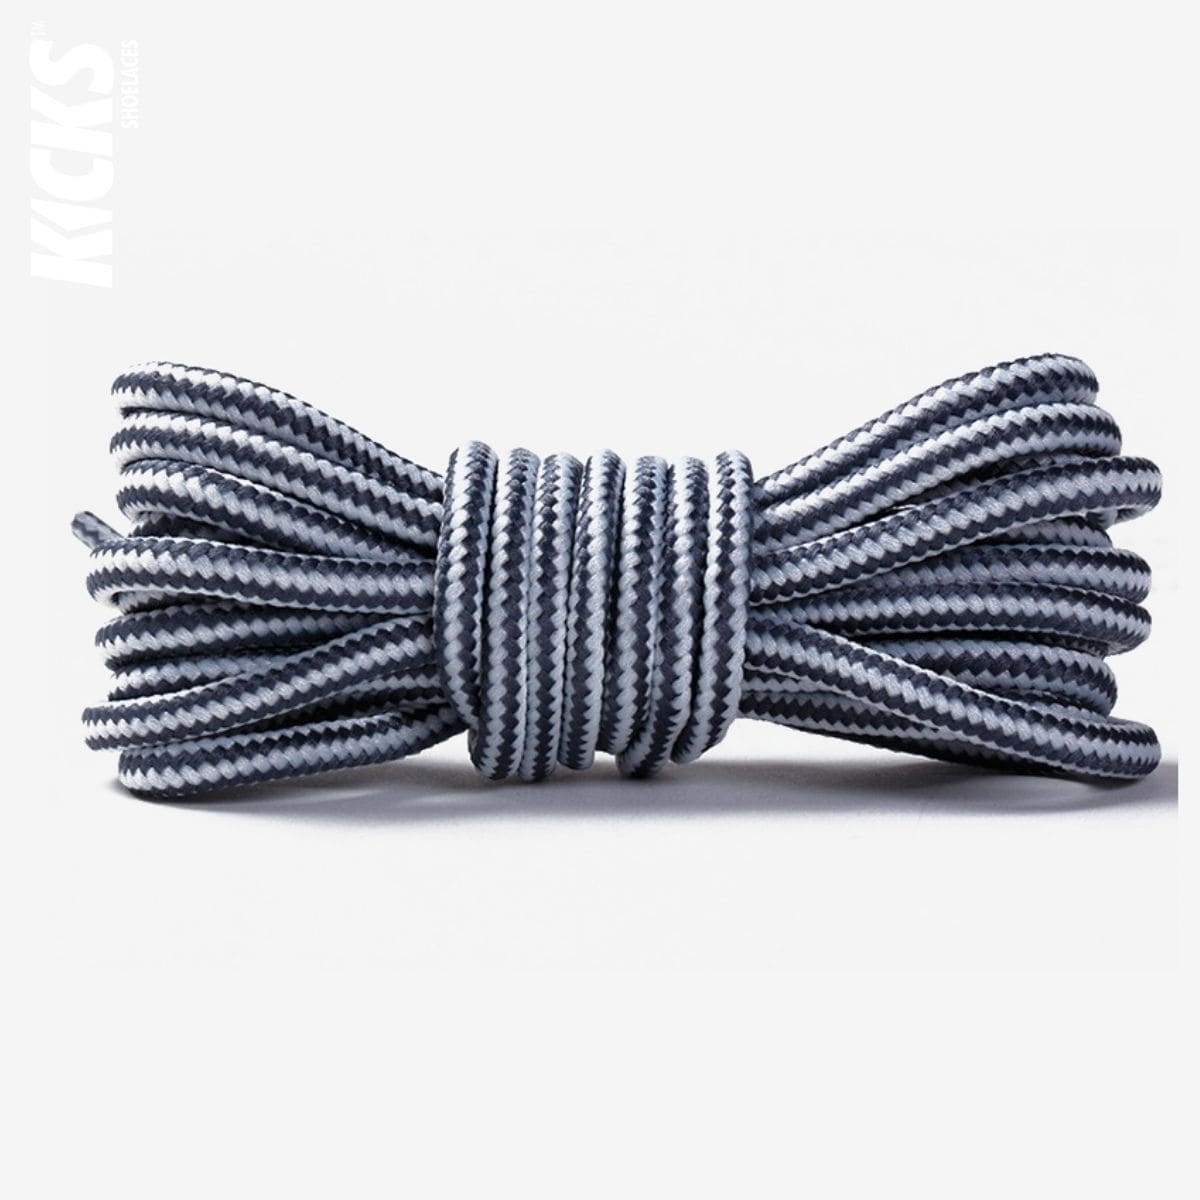 striped-two-color-shoelaces-for-casual-shoes-in-dark-grey-and-white